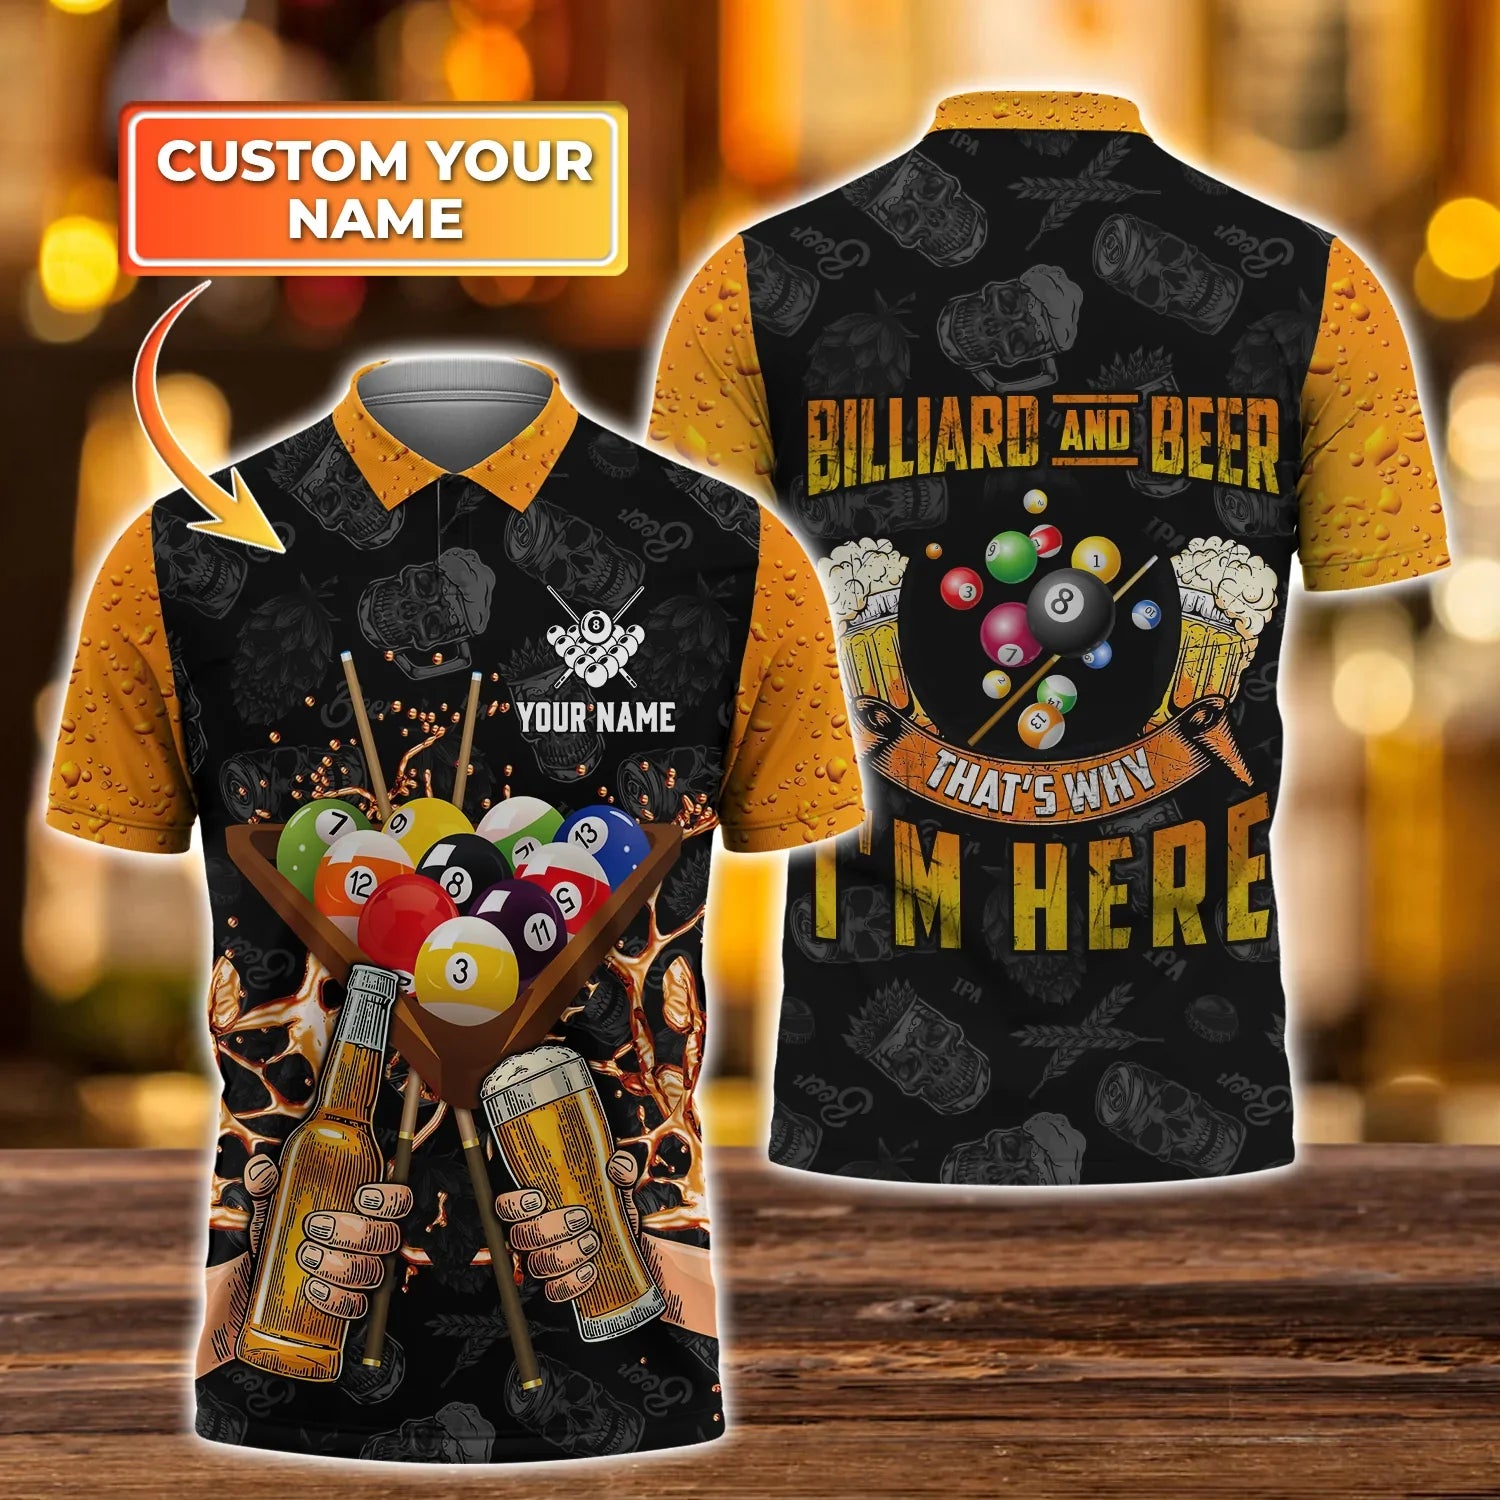 Personalized Name Yellow Billiard Player All Over Printed Polo Shirt/ Billiard and Beer That Why I''m Here Shirt For Men